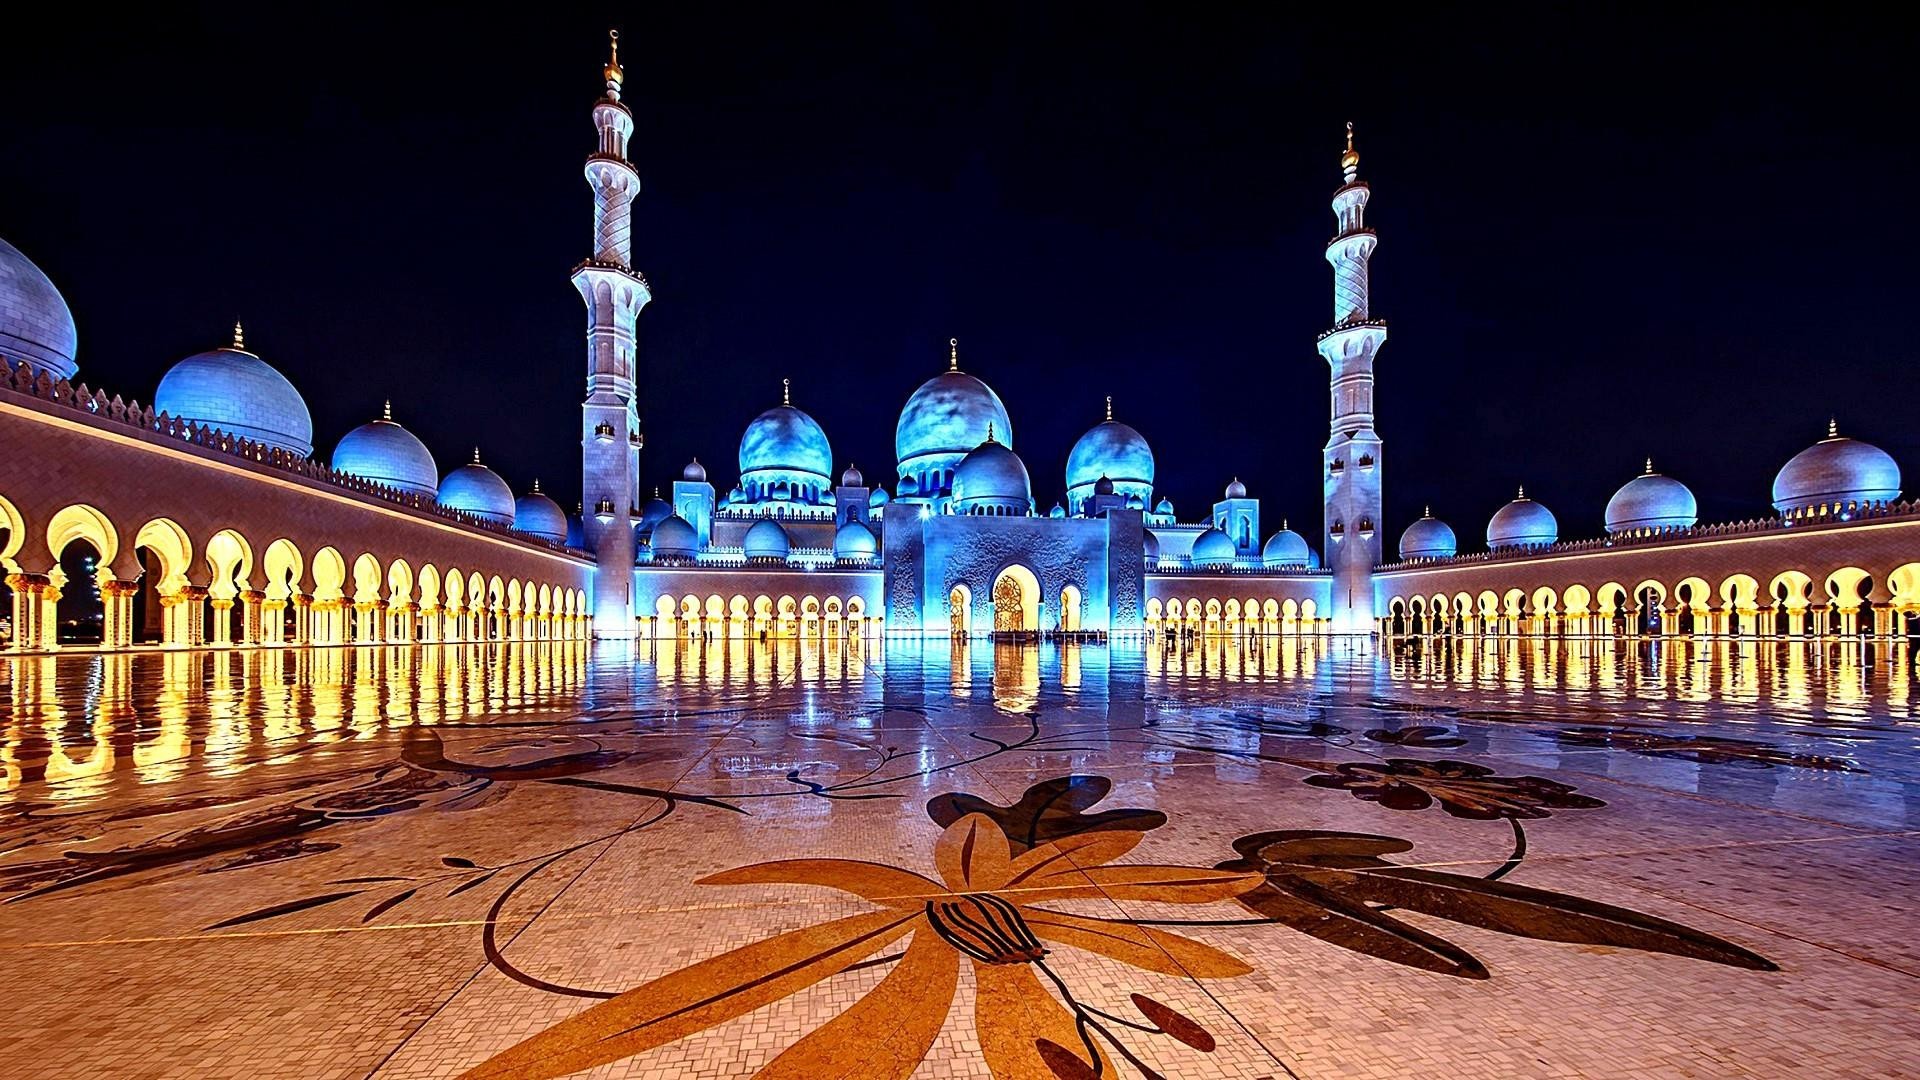 Background Masjid - Masjid Nabawi HD Wallpapers 2013 - Articles about